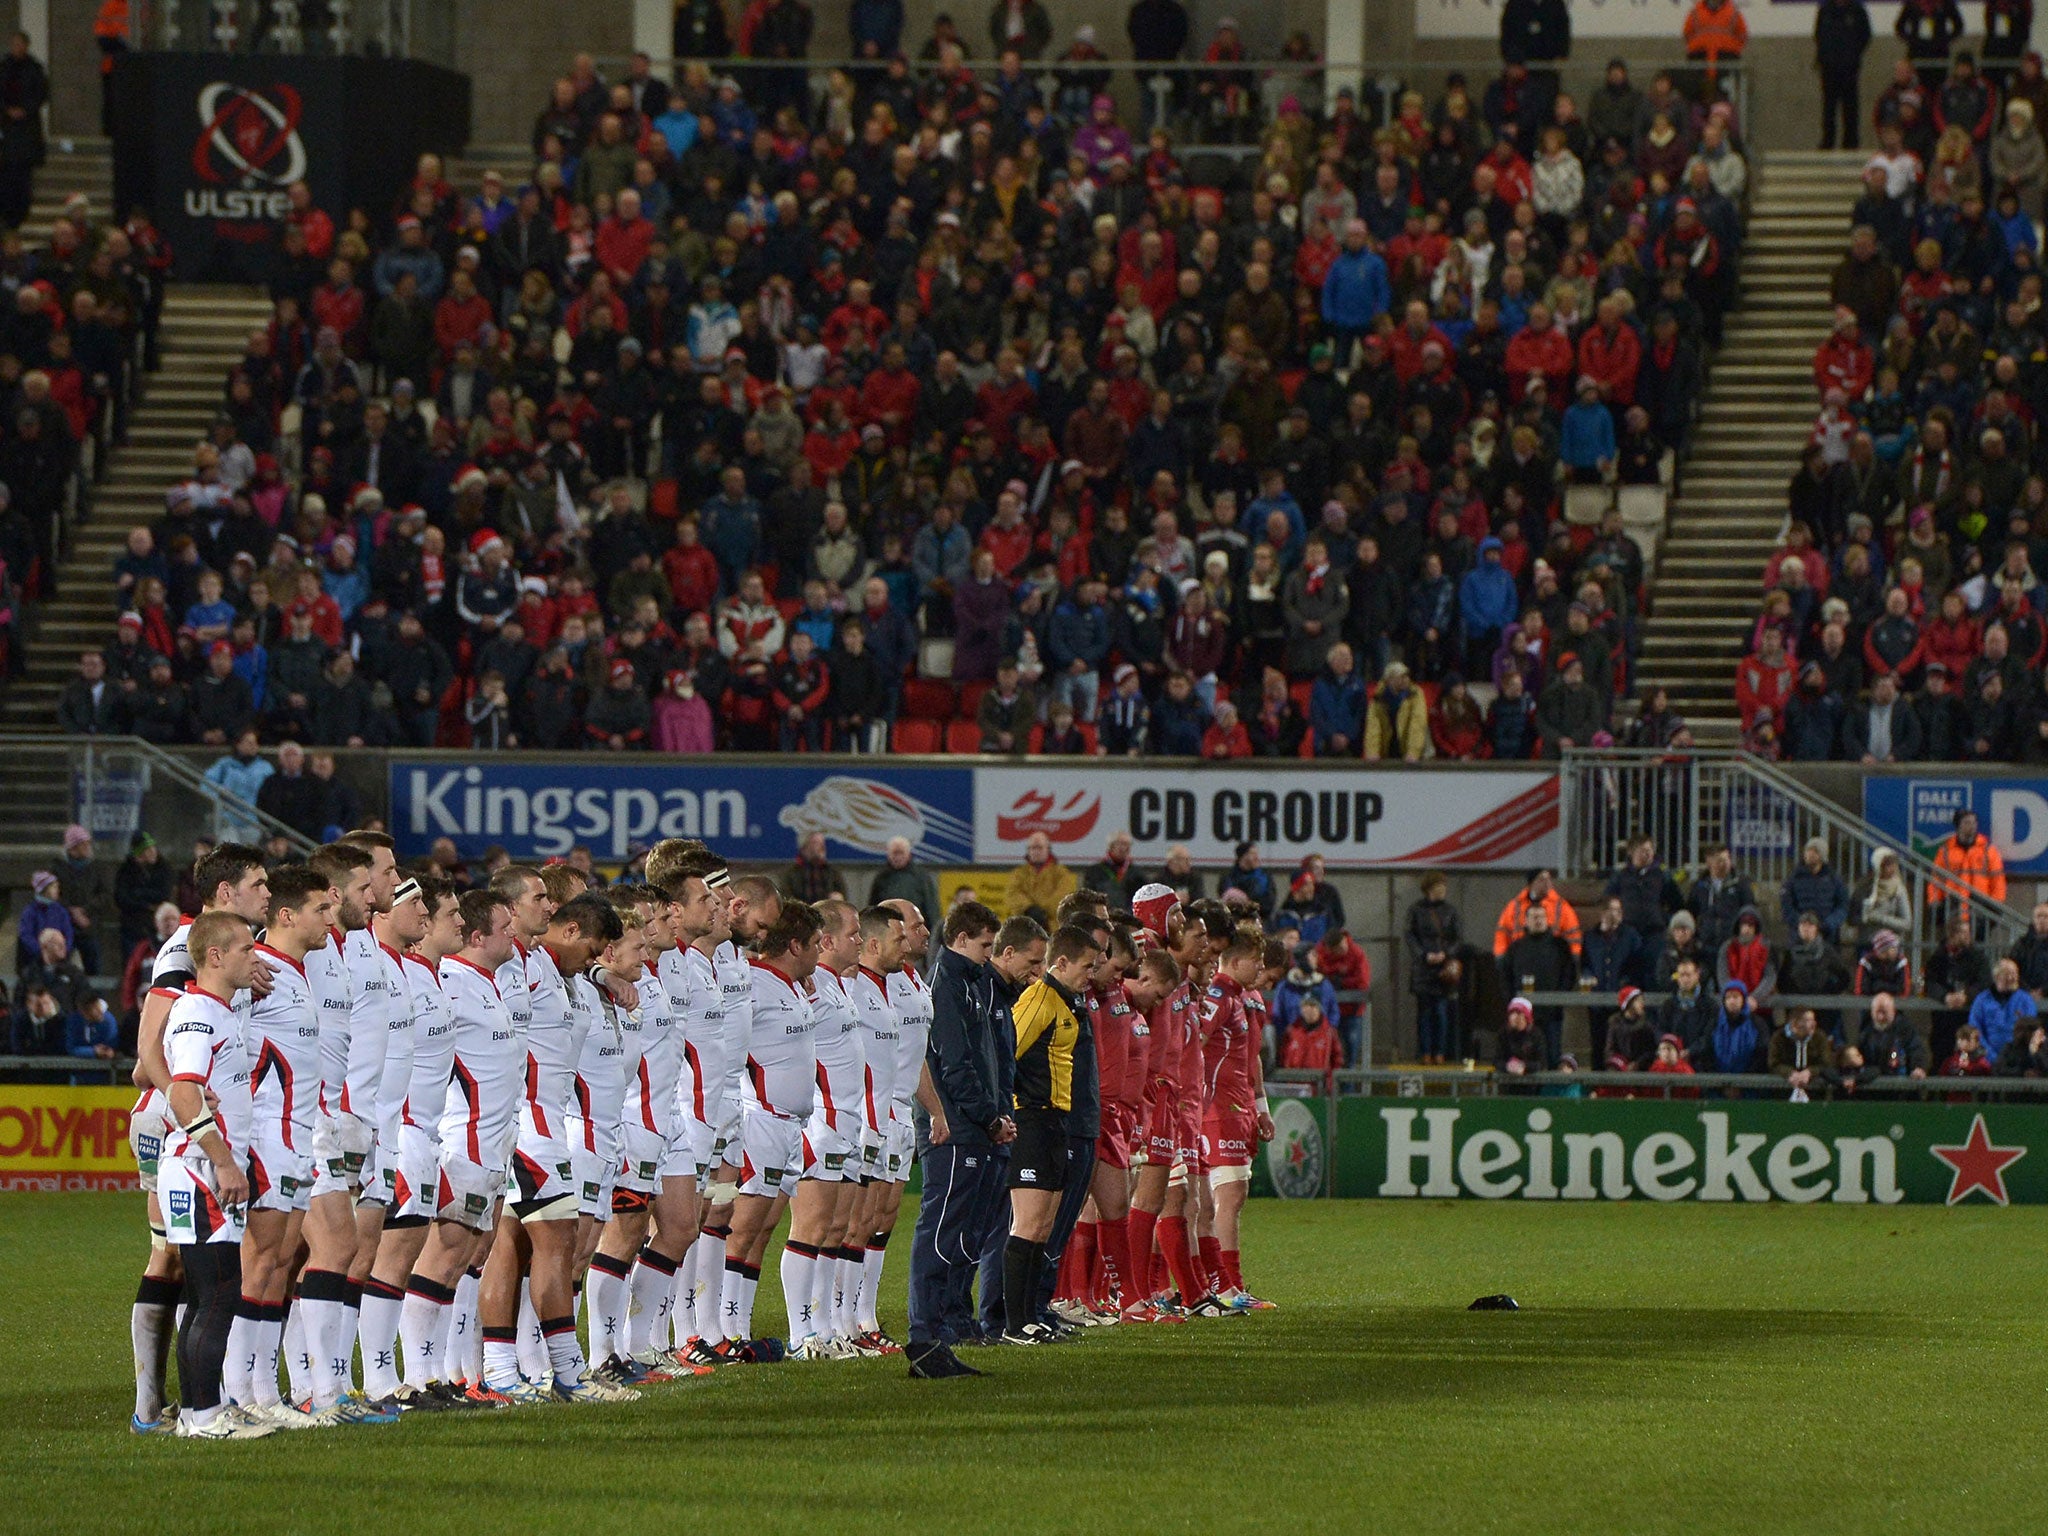 Ulster Rugby have been criticised for not wearing a poppy on their shirts